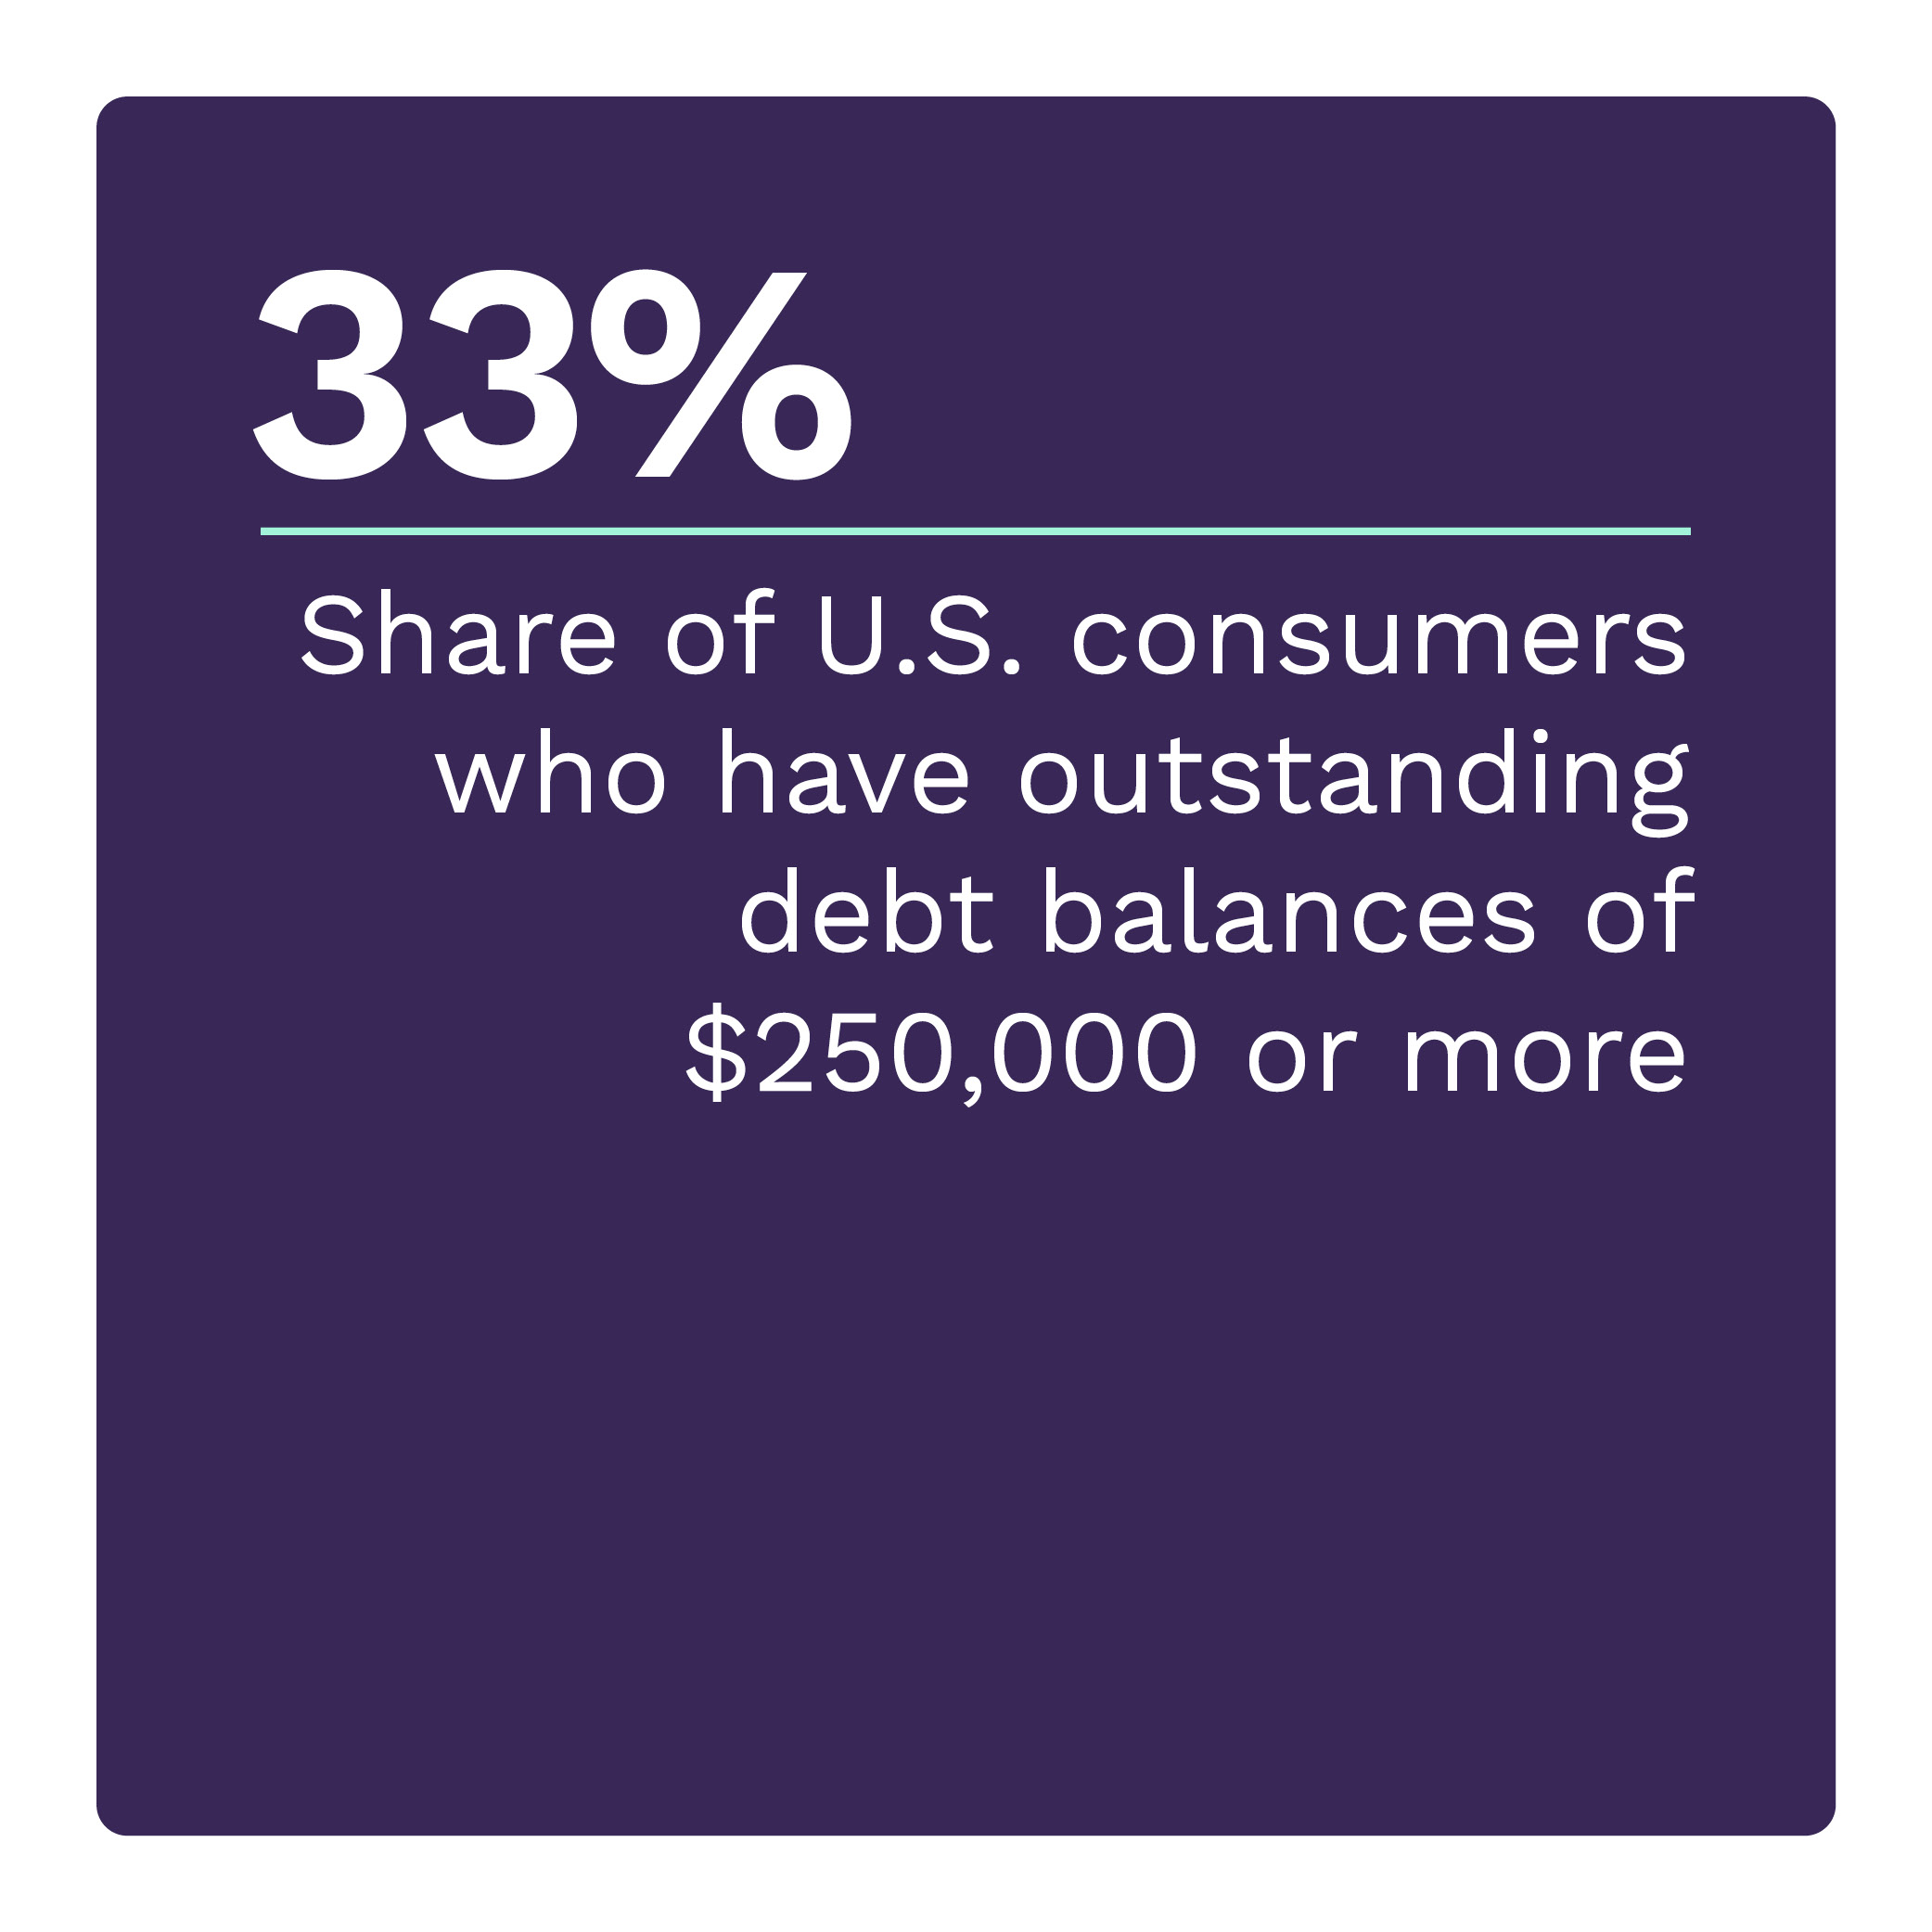 33%: Share of U.S. consumers who have outstanding debt balances of $250,000 or more